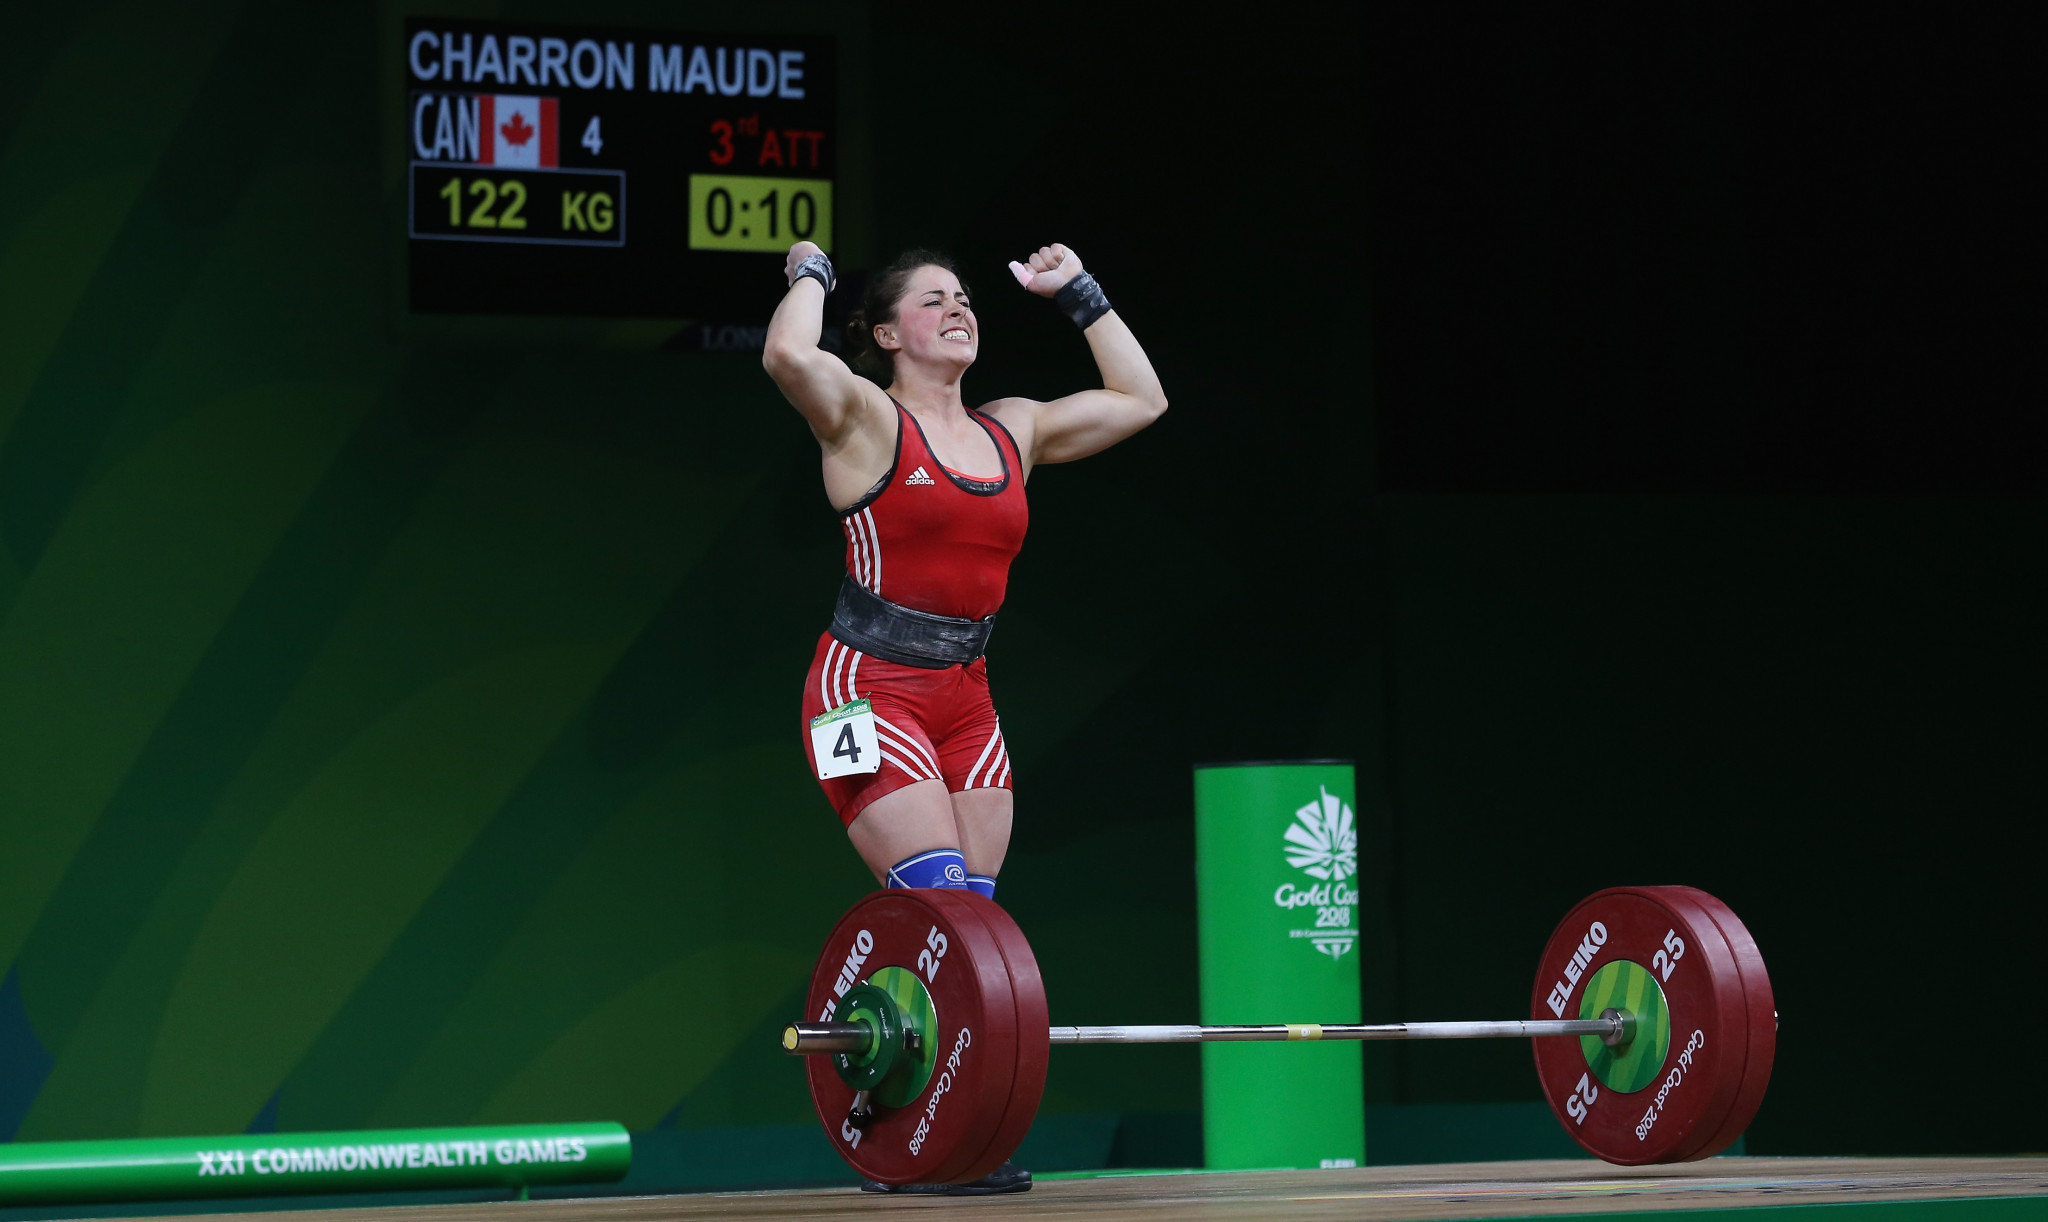 Canada's Charron claims Gold Coast 2018 weightlifting gold before breaking Commonwealth Games clean and jerk record